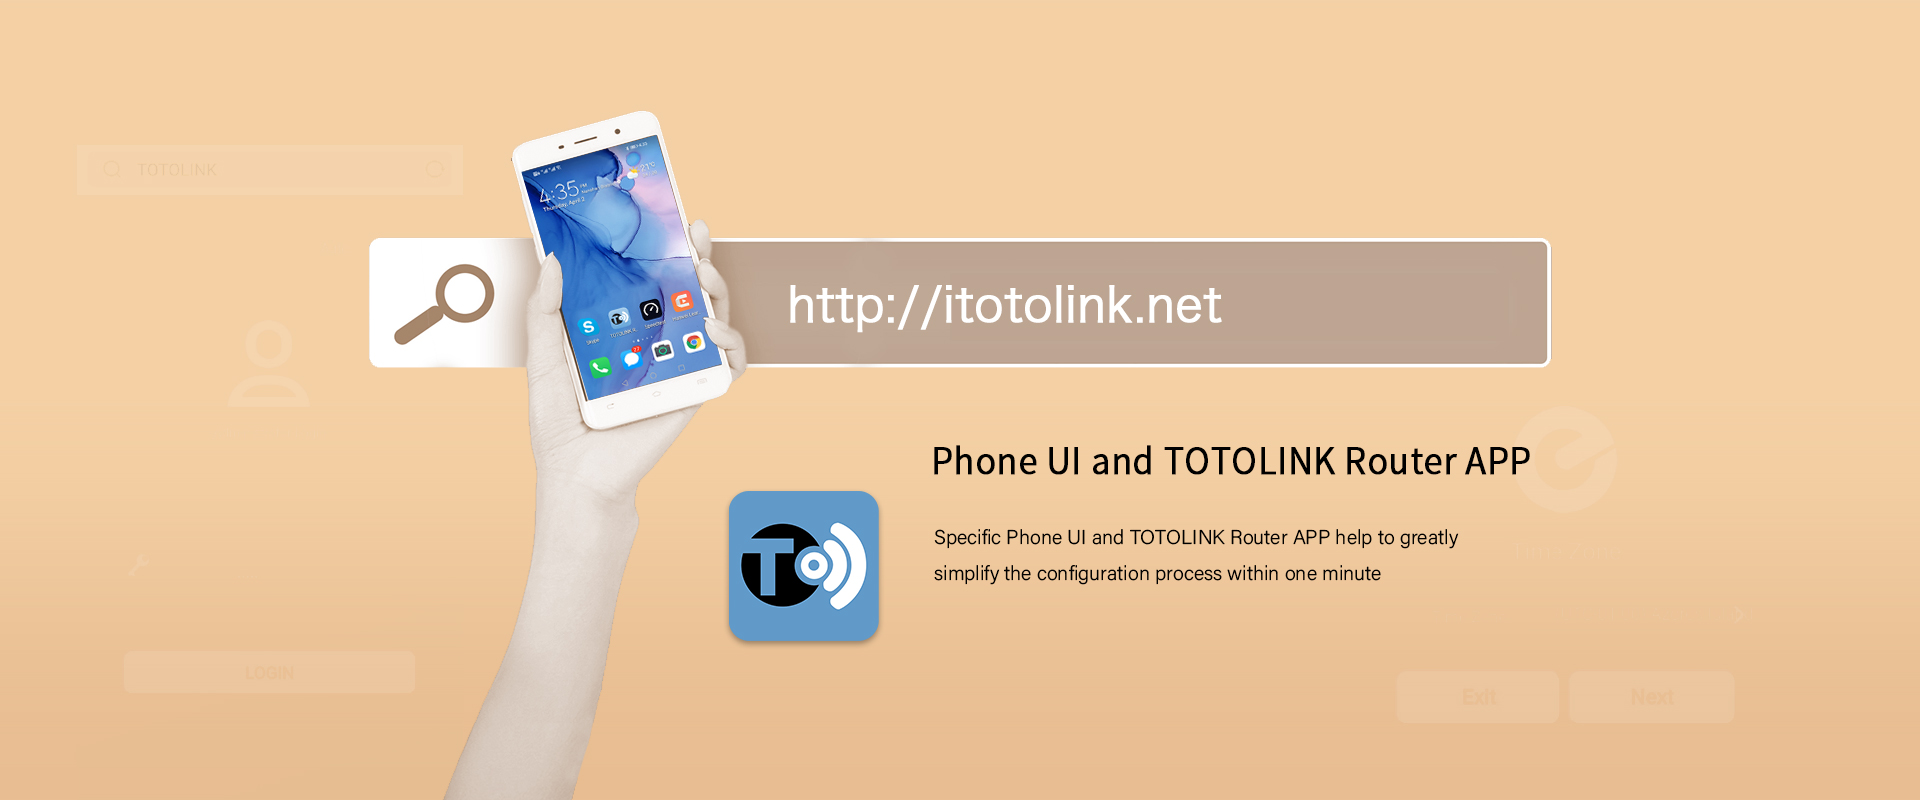 totolink router App Support  